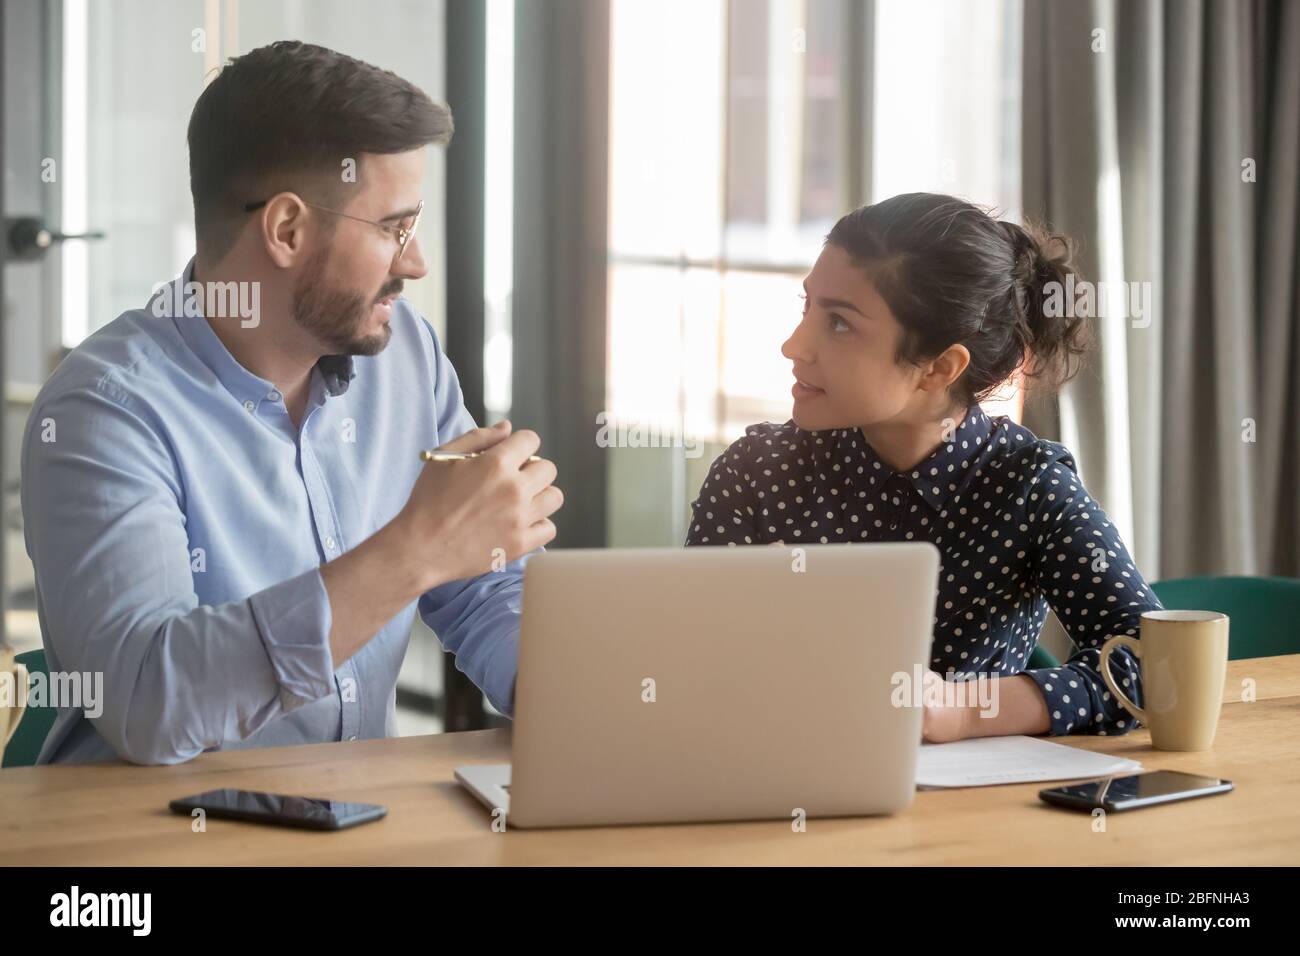 Multi-ethnic co-workers discuss project sitting at workplace Stock Photo